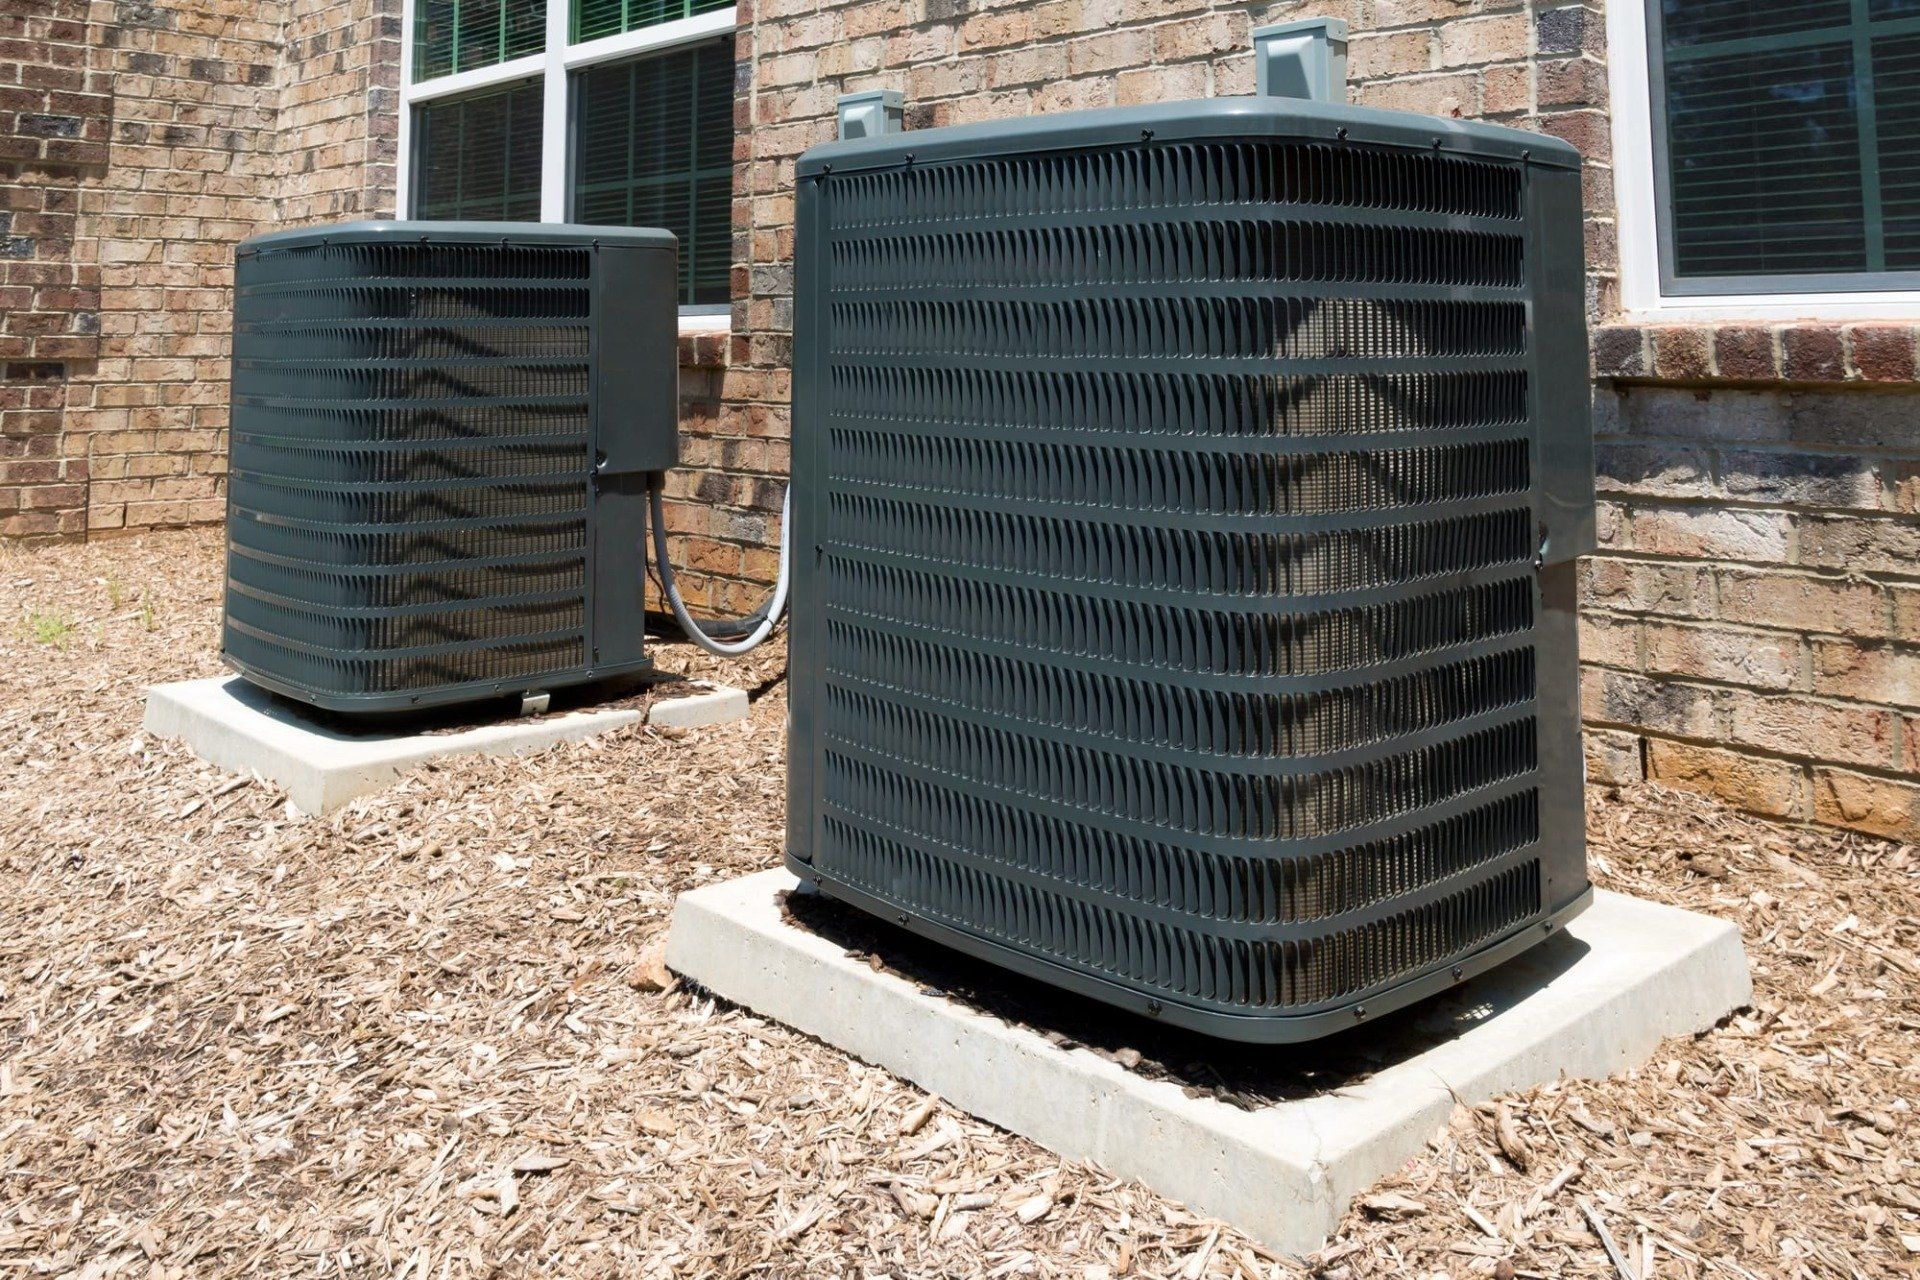 2 hvac systems outside of brick house